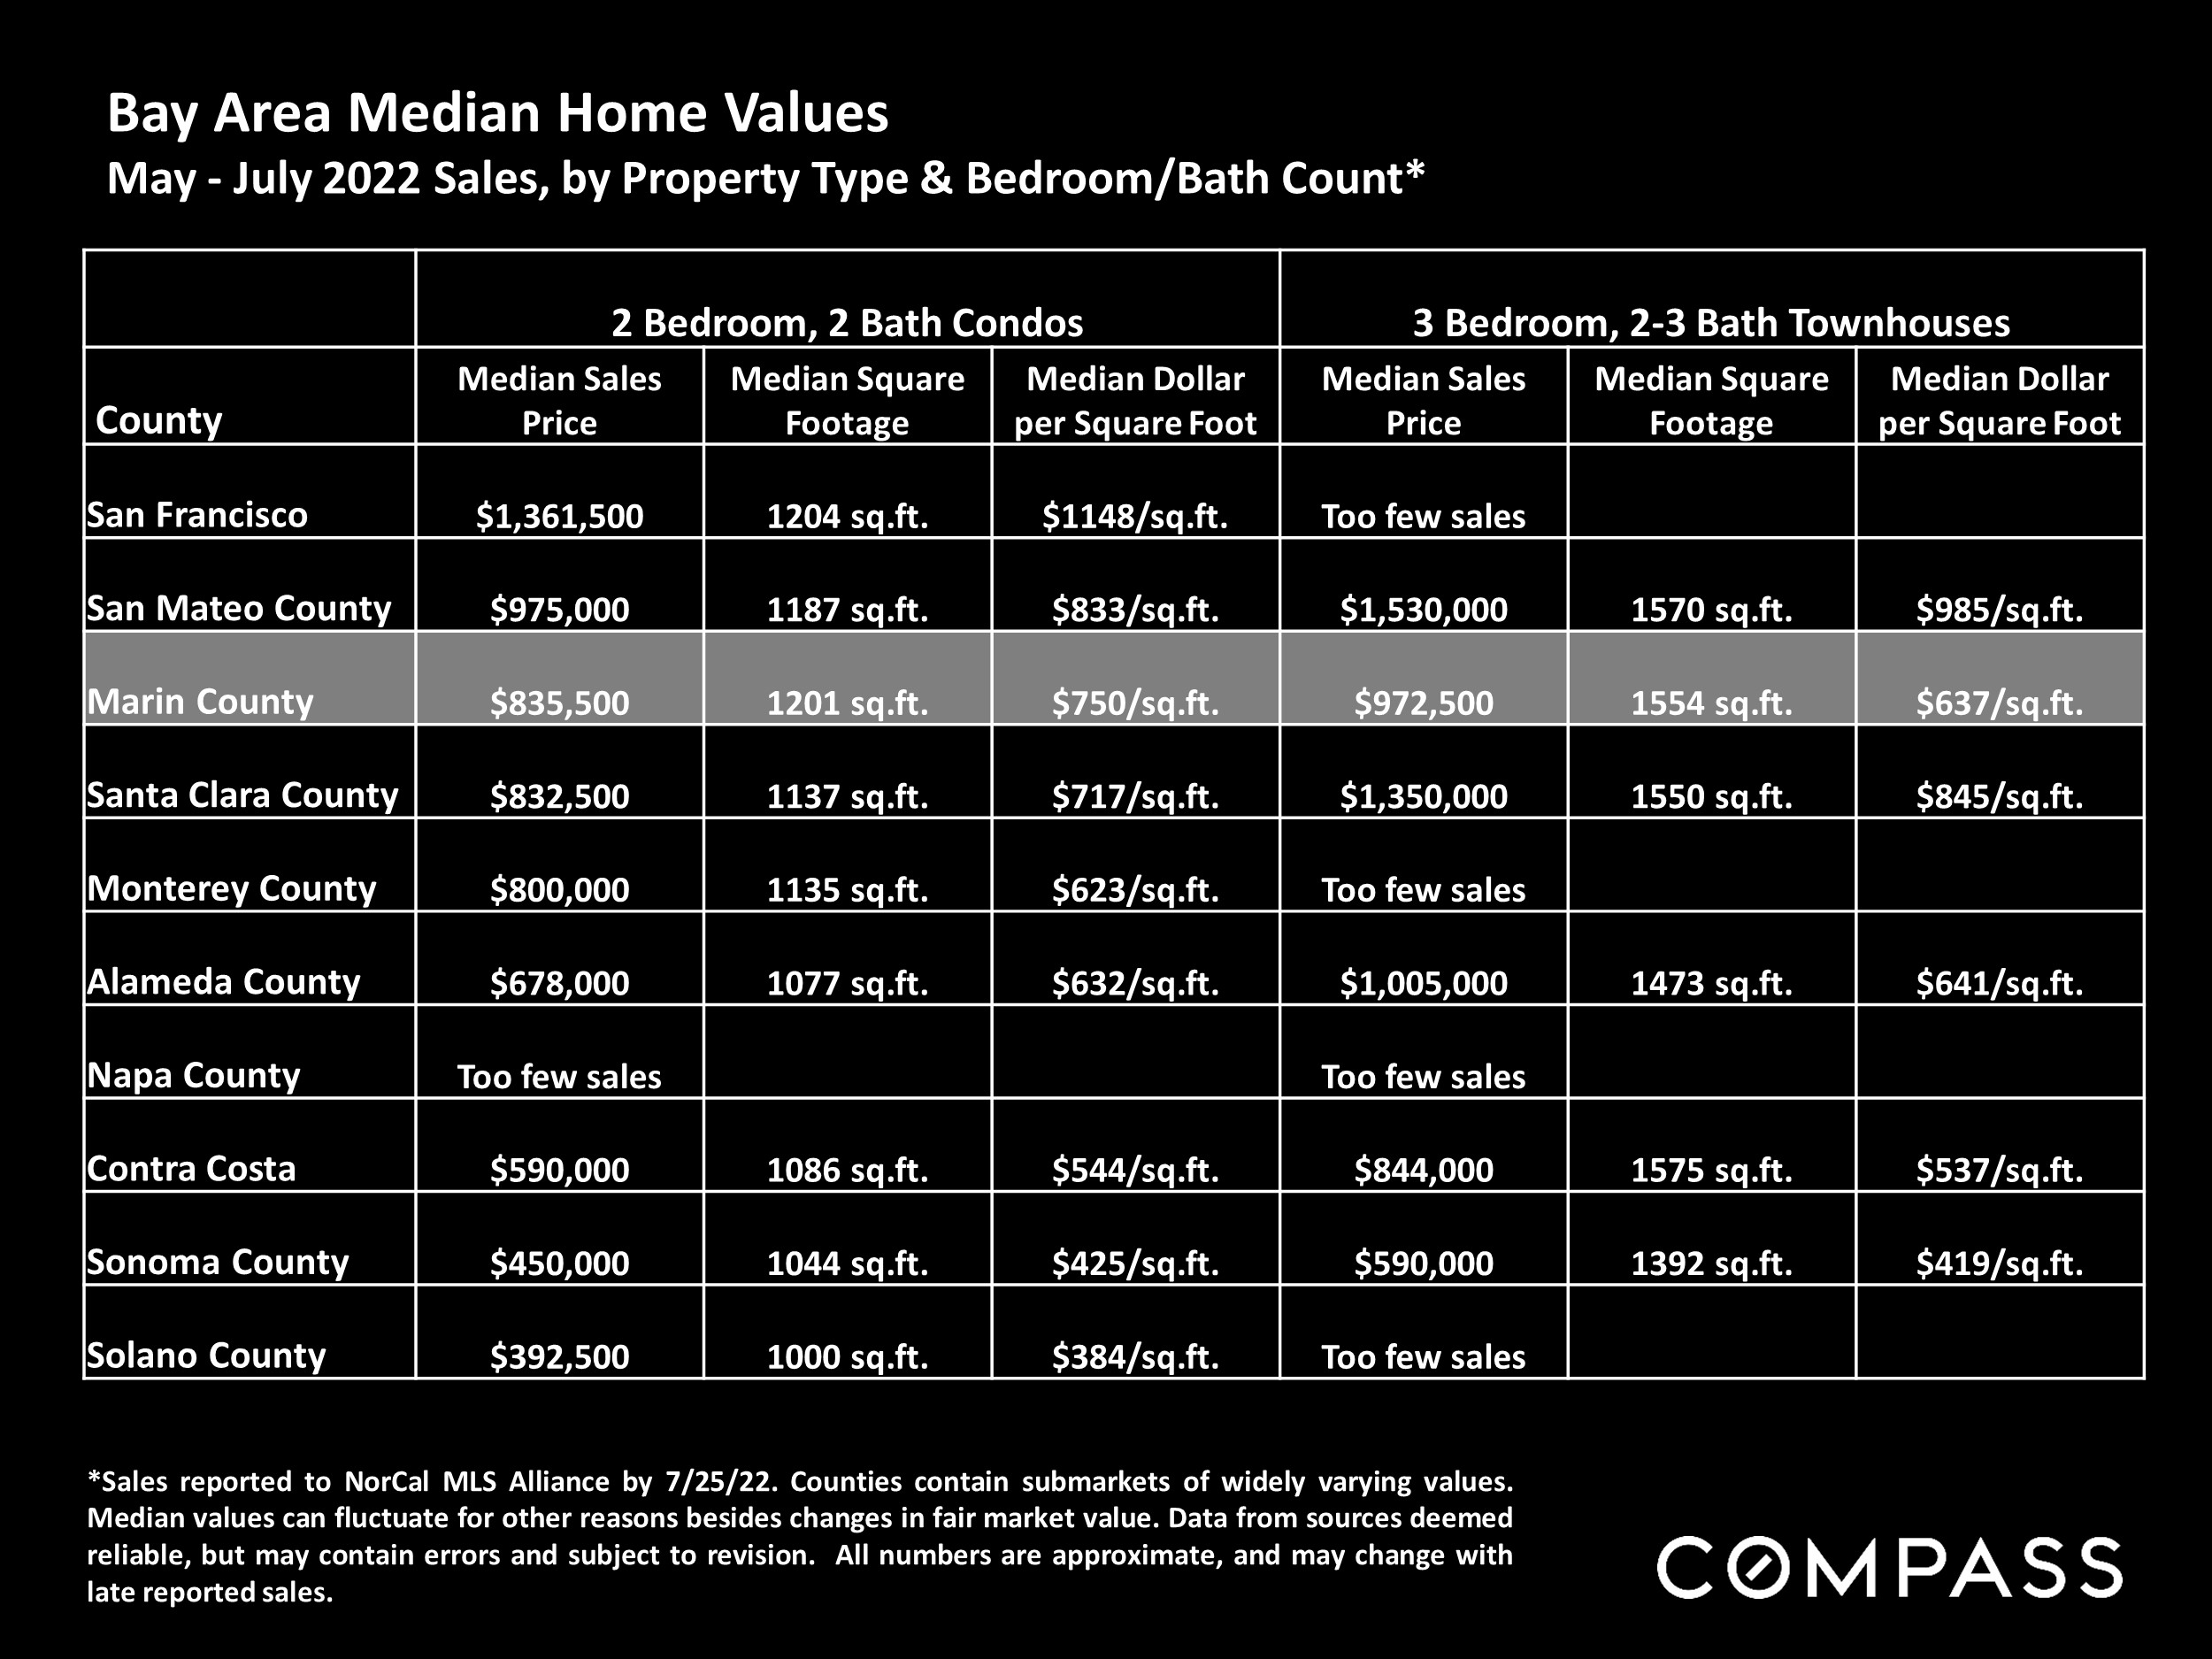 Bay Area Median Home Values Continued